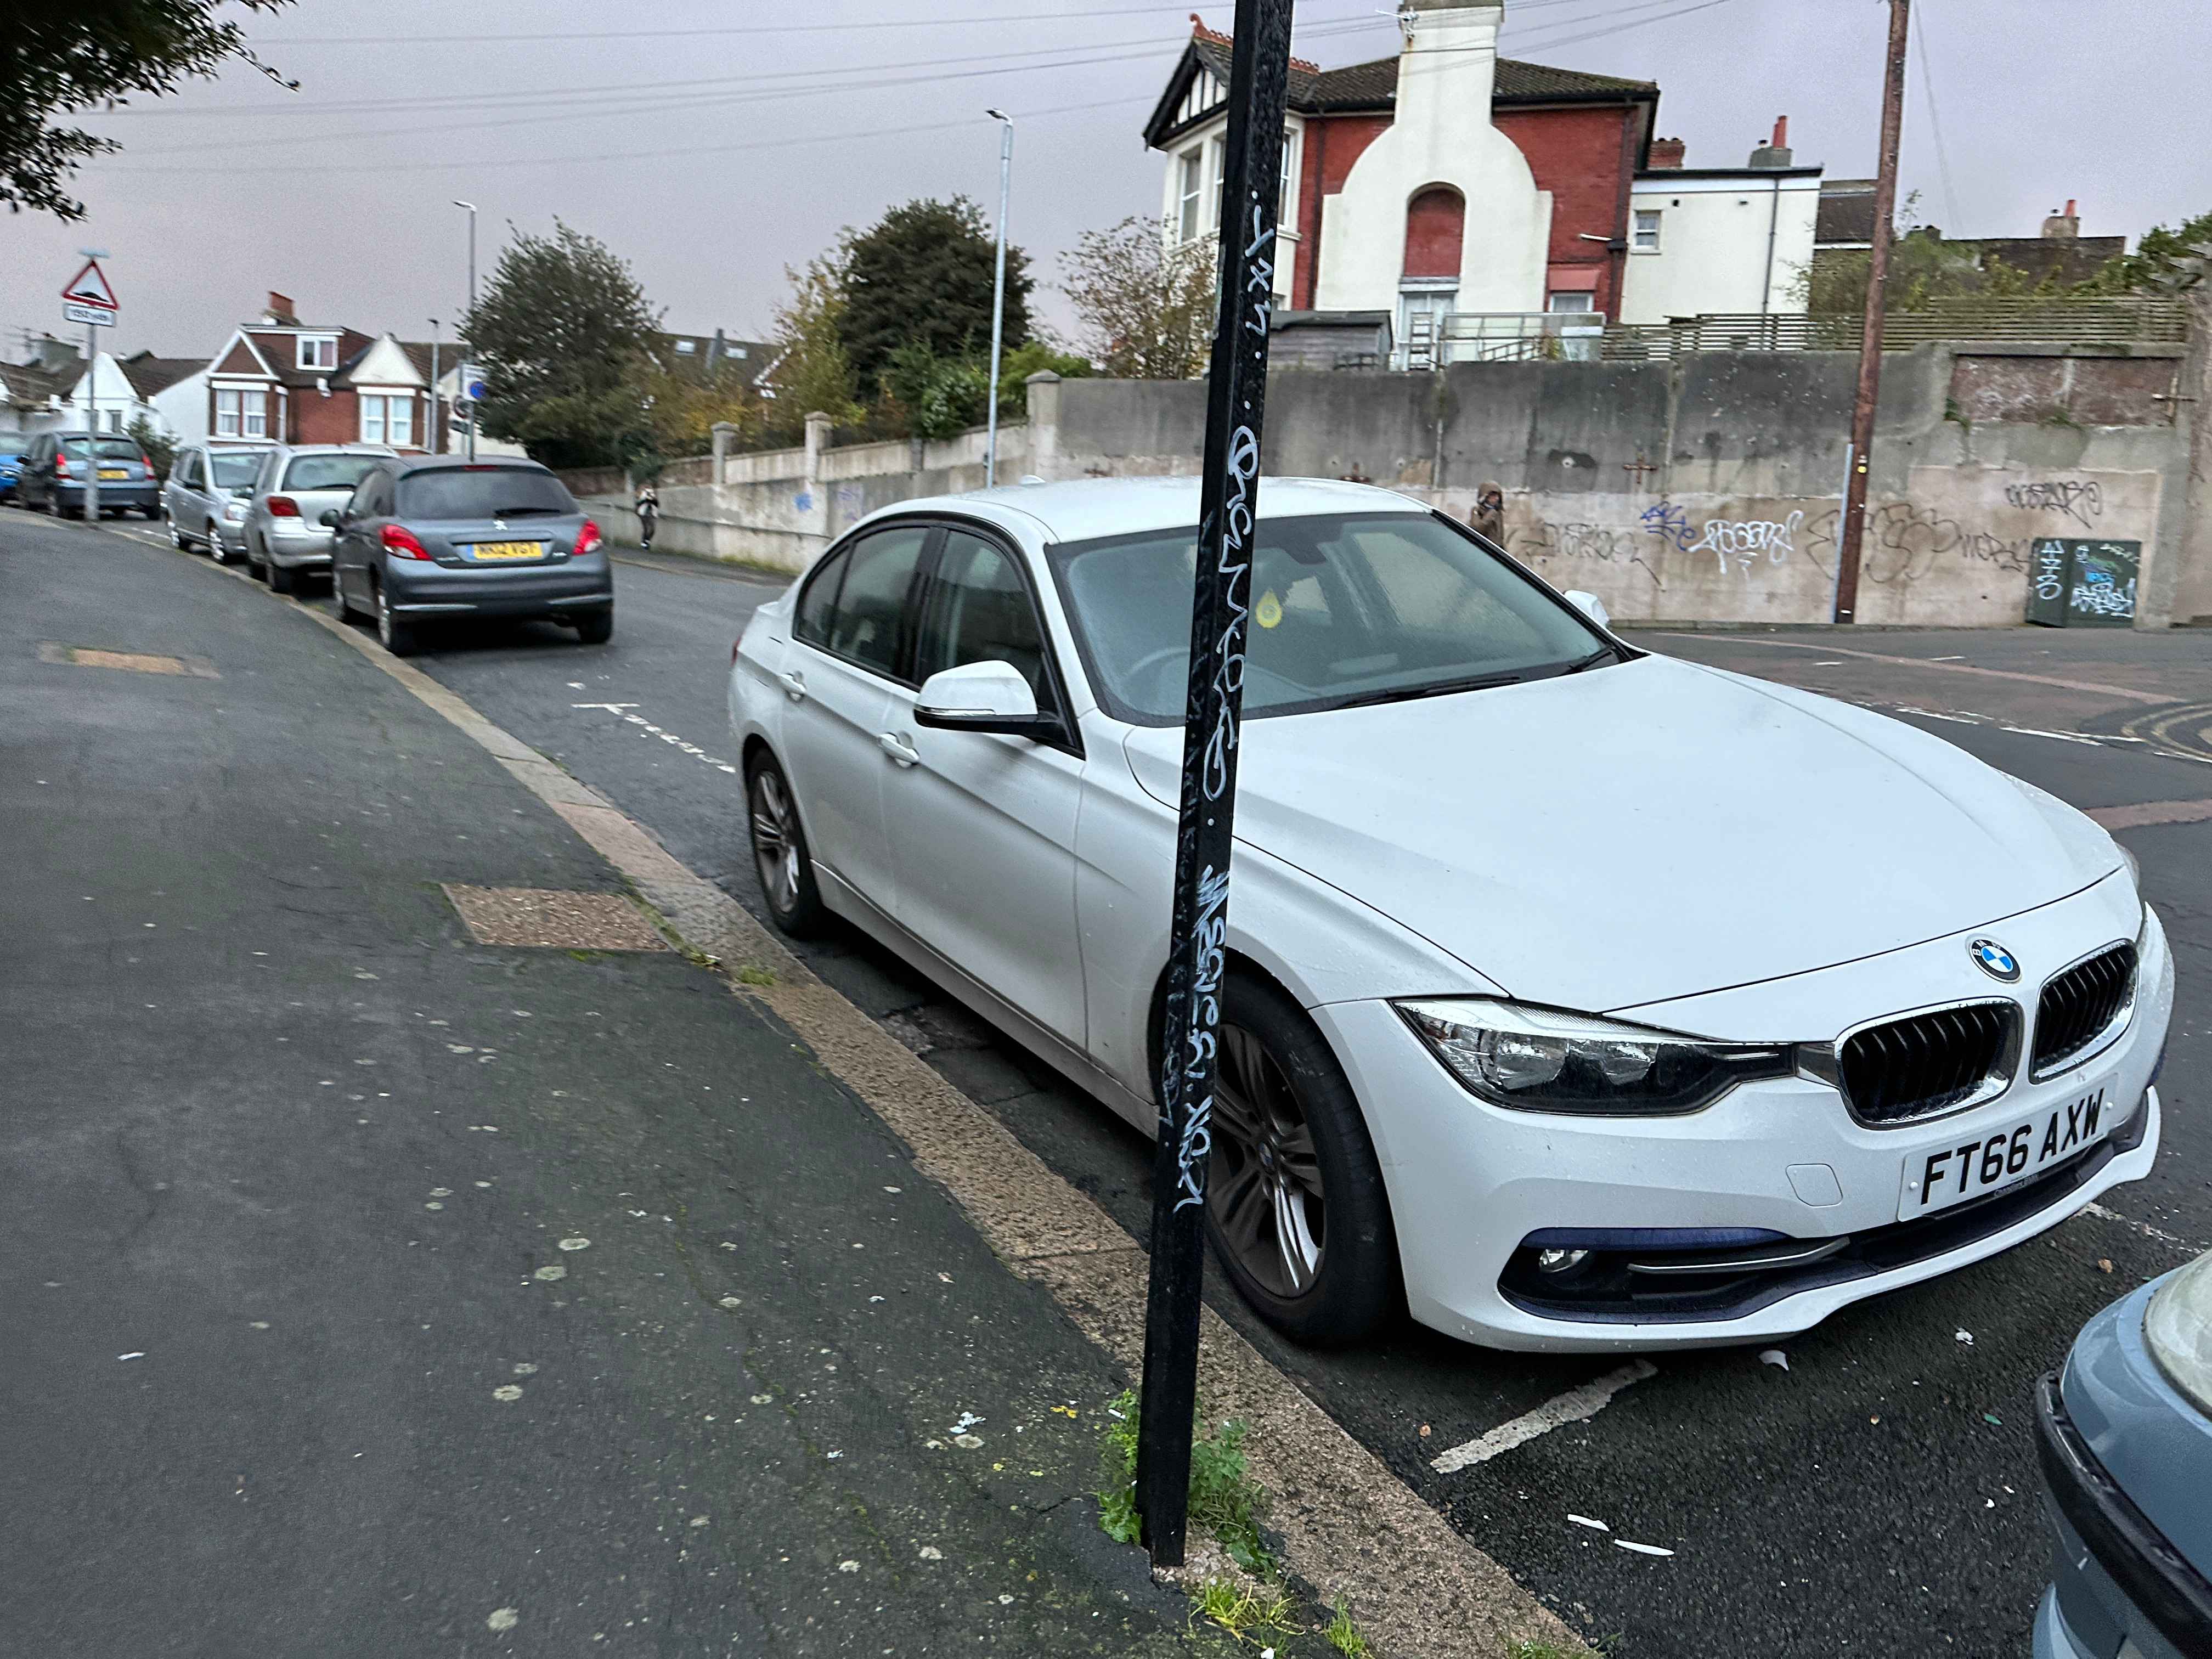 Photograph of FT66 AXW - a White BMW 3 Series parked in Hollingdean by a non-resident who uses the local area as part of their Brighton commute. The sixth of seven photographs supplied by the residents of Hollingdean.